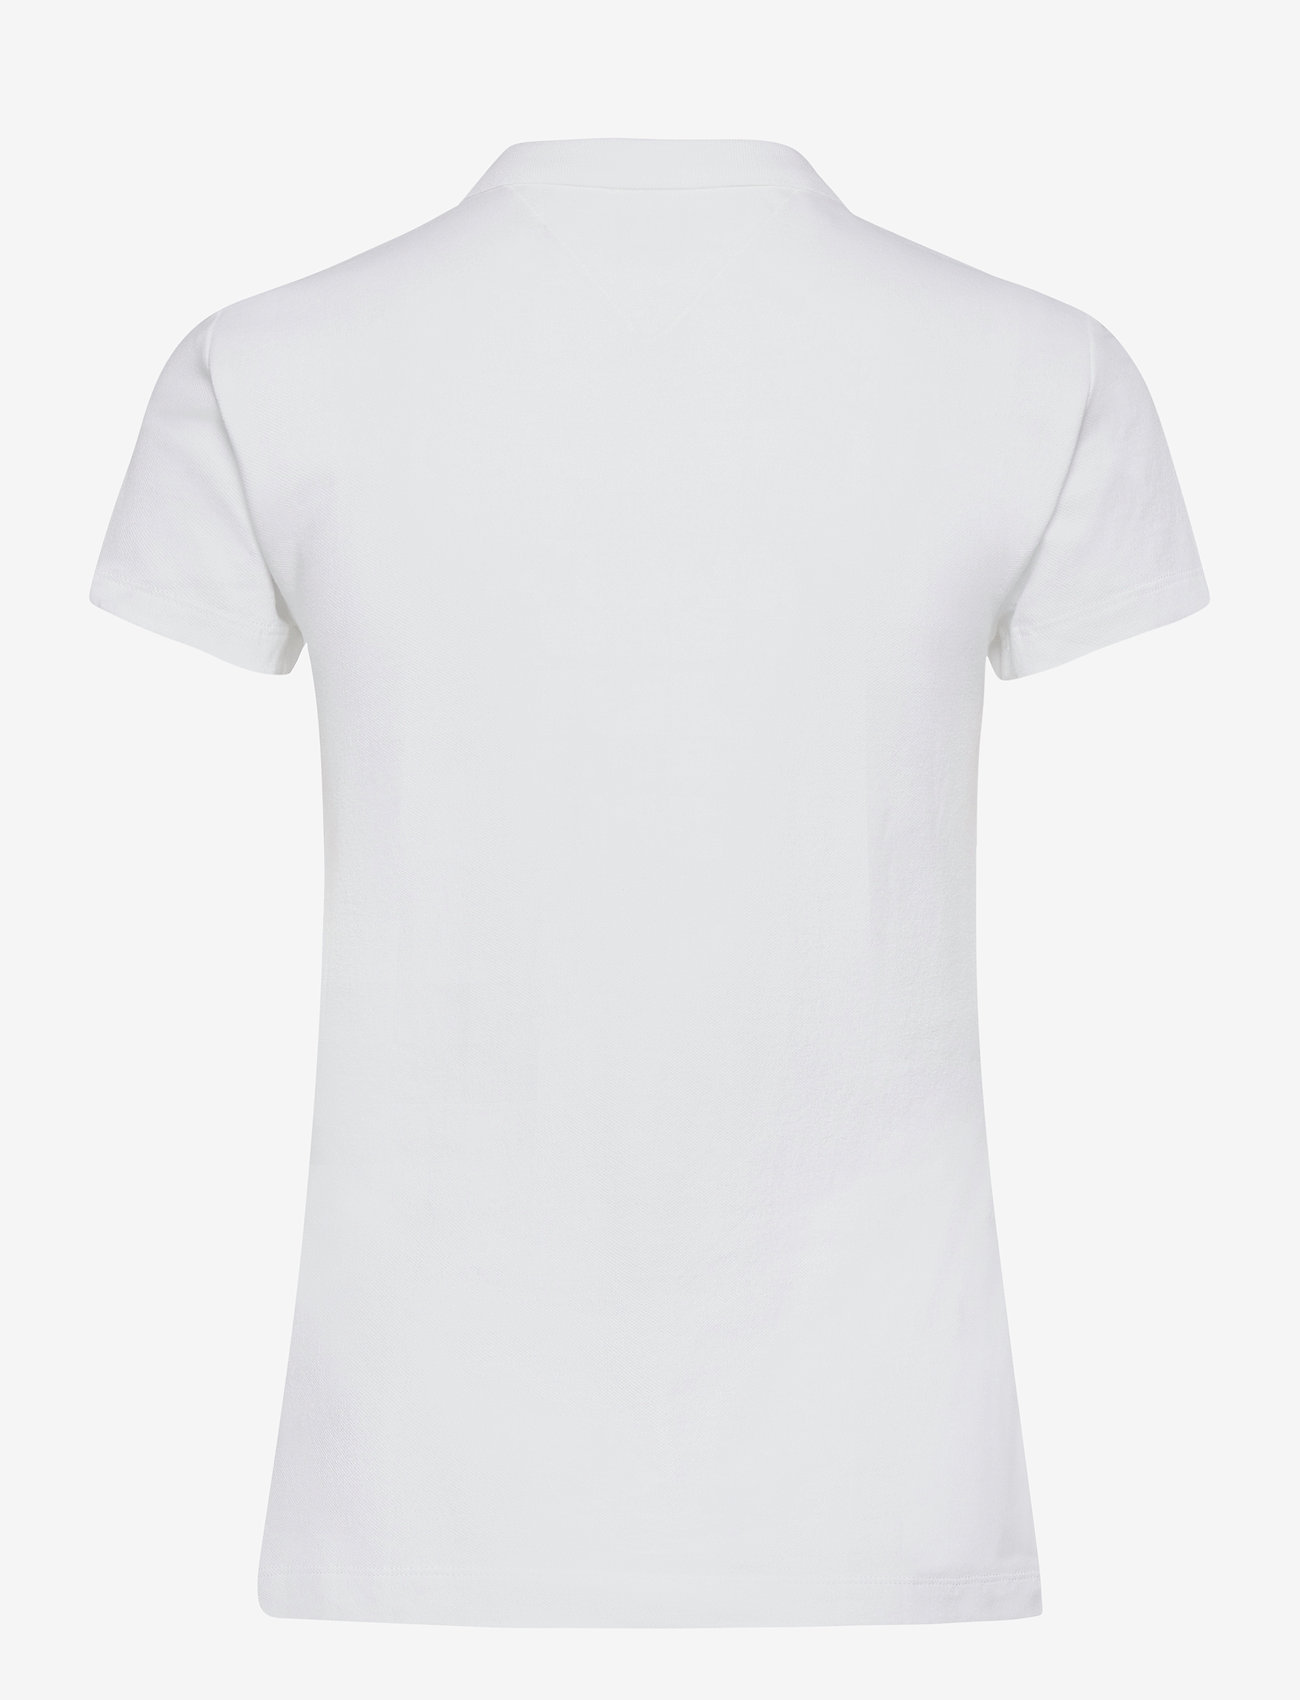 Tommy Hilfiger - HERITAGE SHORT SLEEVE SLIM POLO - polo shirts - classic white - 1